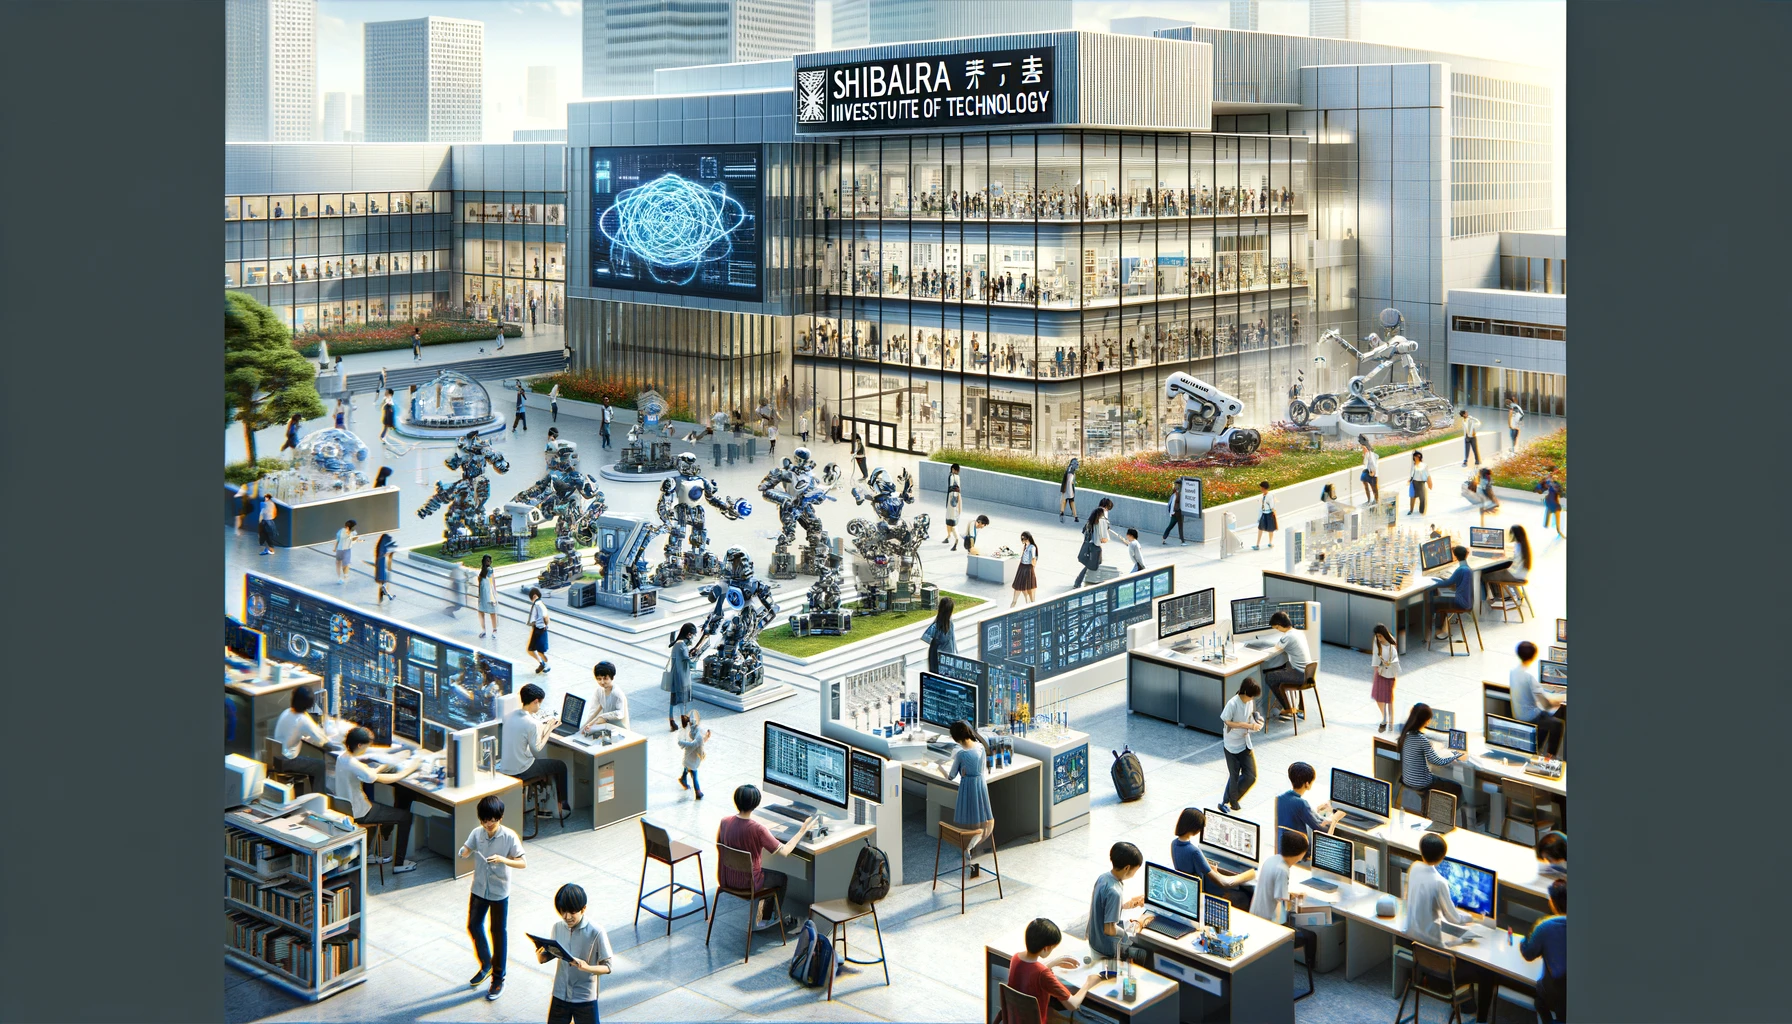 An inspiring campus scene at Shibaura Institute of Technology in Japan, showcasing why it is popular, with the word 'Shibaura' prominently displayed in English. The image features students of various Asian descents engaged in advanced engineering and technological activities. Students are seen working on robotics, programming in computer labs, and conducting scientific experiments in state-of-the-art facilities. The campus includes modern buildings with sleek designs and high-tech environments. Some students collaborate on projects while others present their innovative ideas to peers. The atmosphere is dynamic and future-focused, illustrating a hub of innovation and learning with the university's name visibly included in the scene.